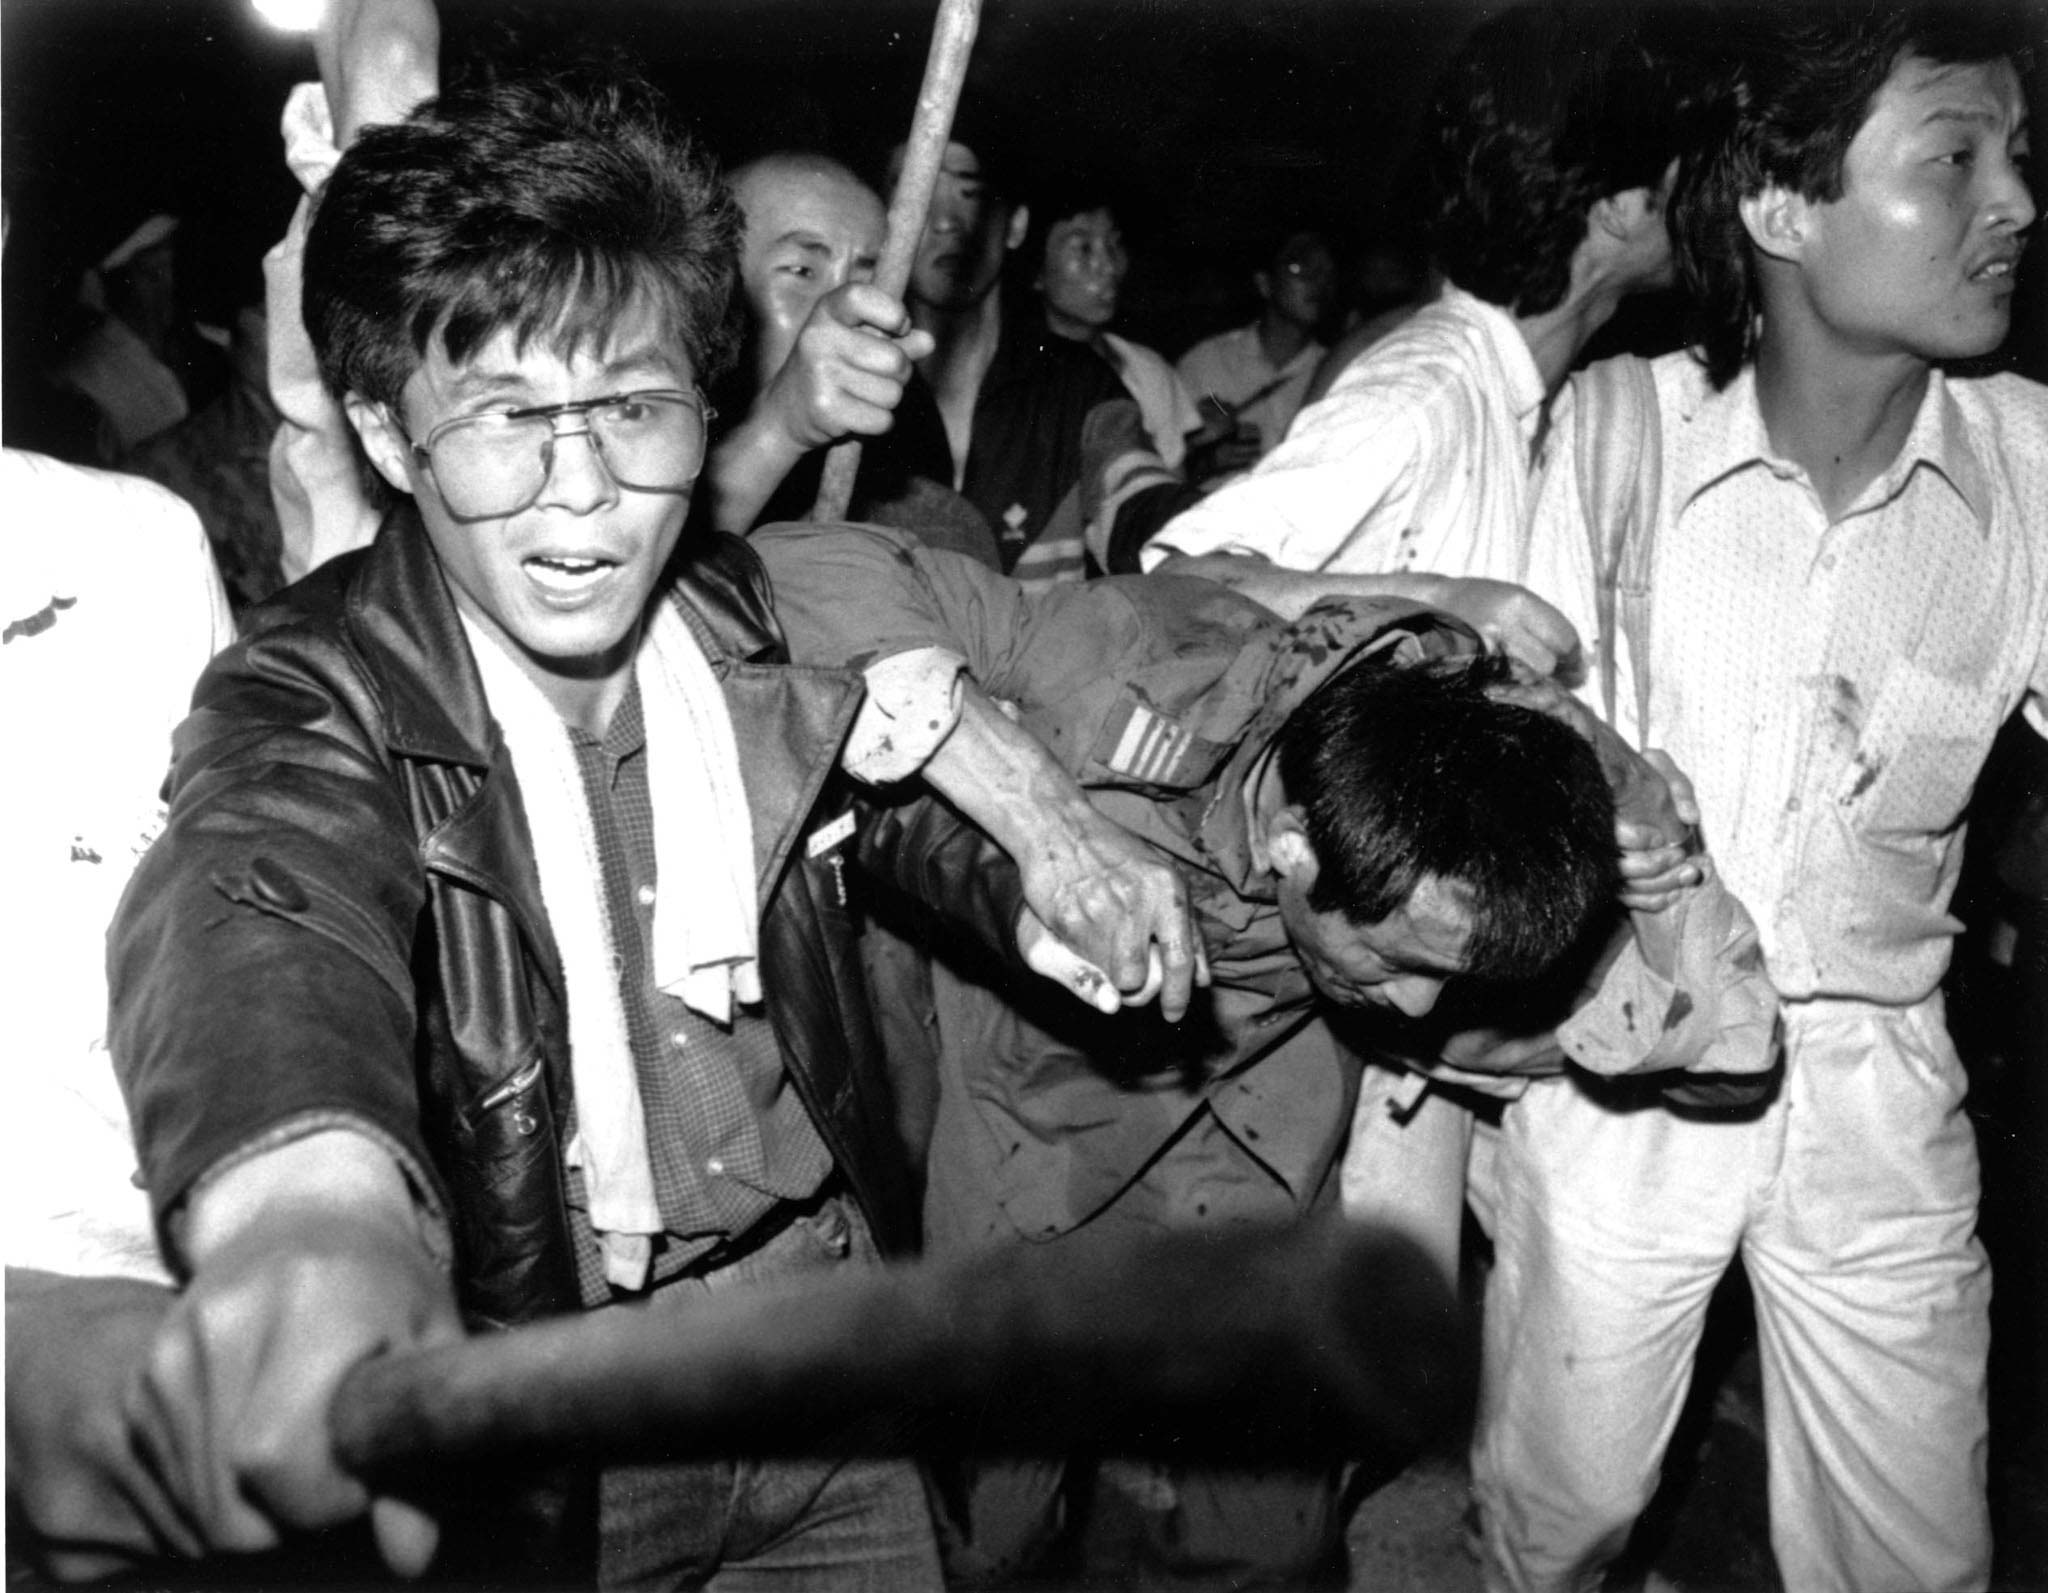 A captured tank driver is helped to safety by students as the crowd beats him June 4, 1989. This year marks the 10th anniversary of the bloody June 4 1989 army crackdown on the pro-democracy movement at Beijing's Tiananmen Square. Reuters/FILE